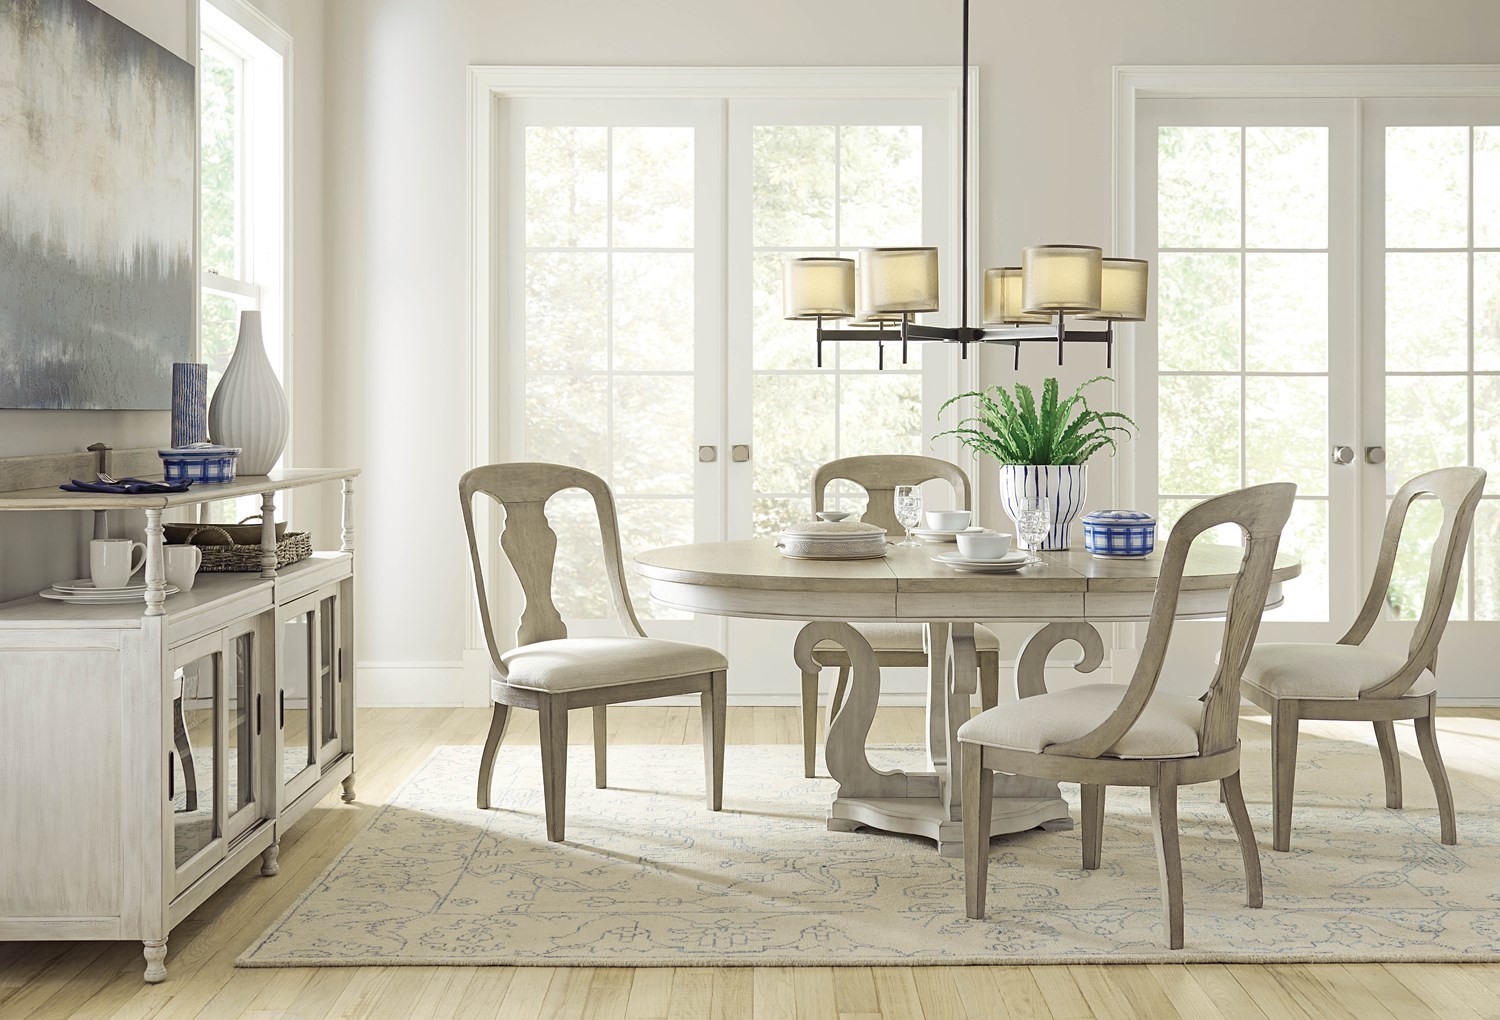 American Drew Furniture Of North Ina, American Dining Room Furniture